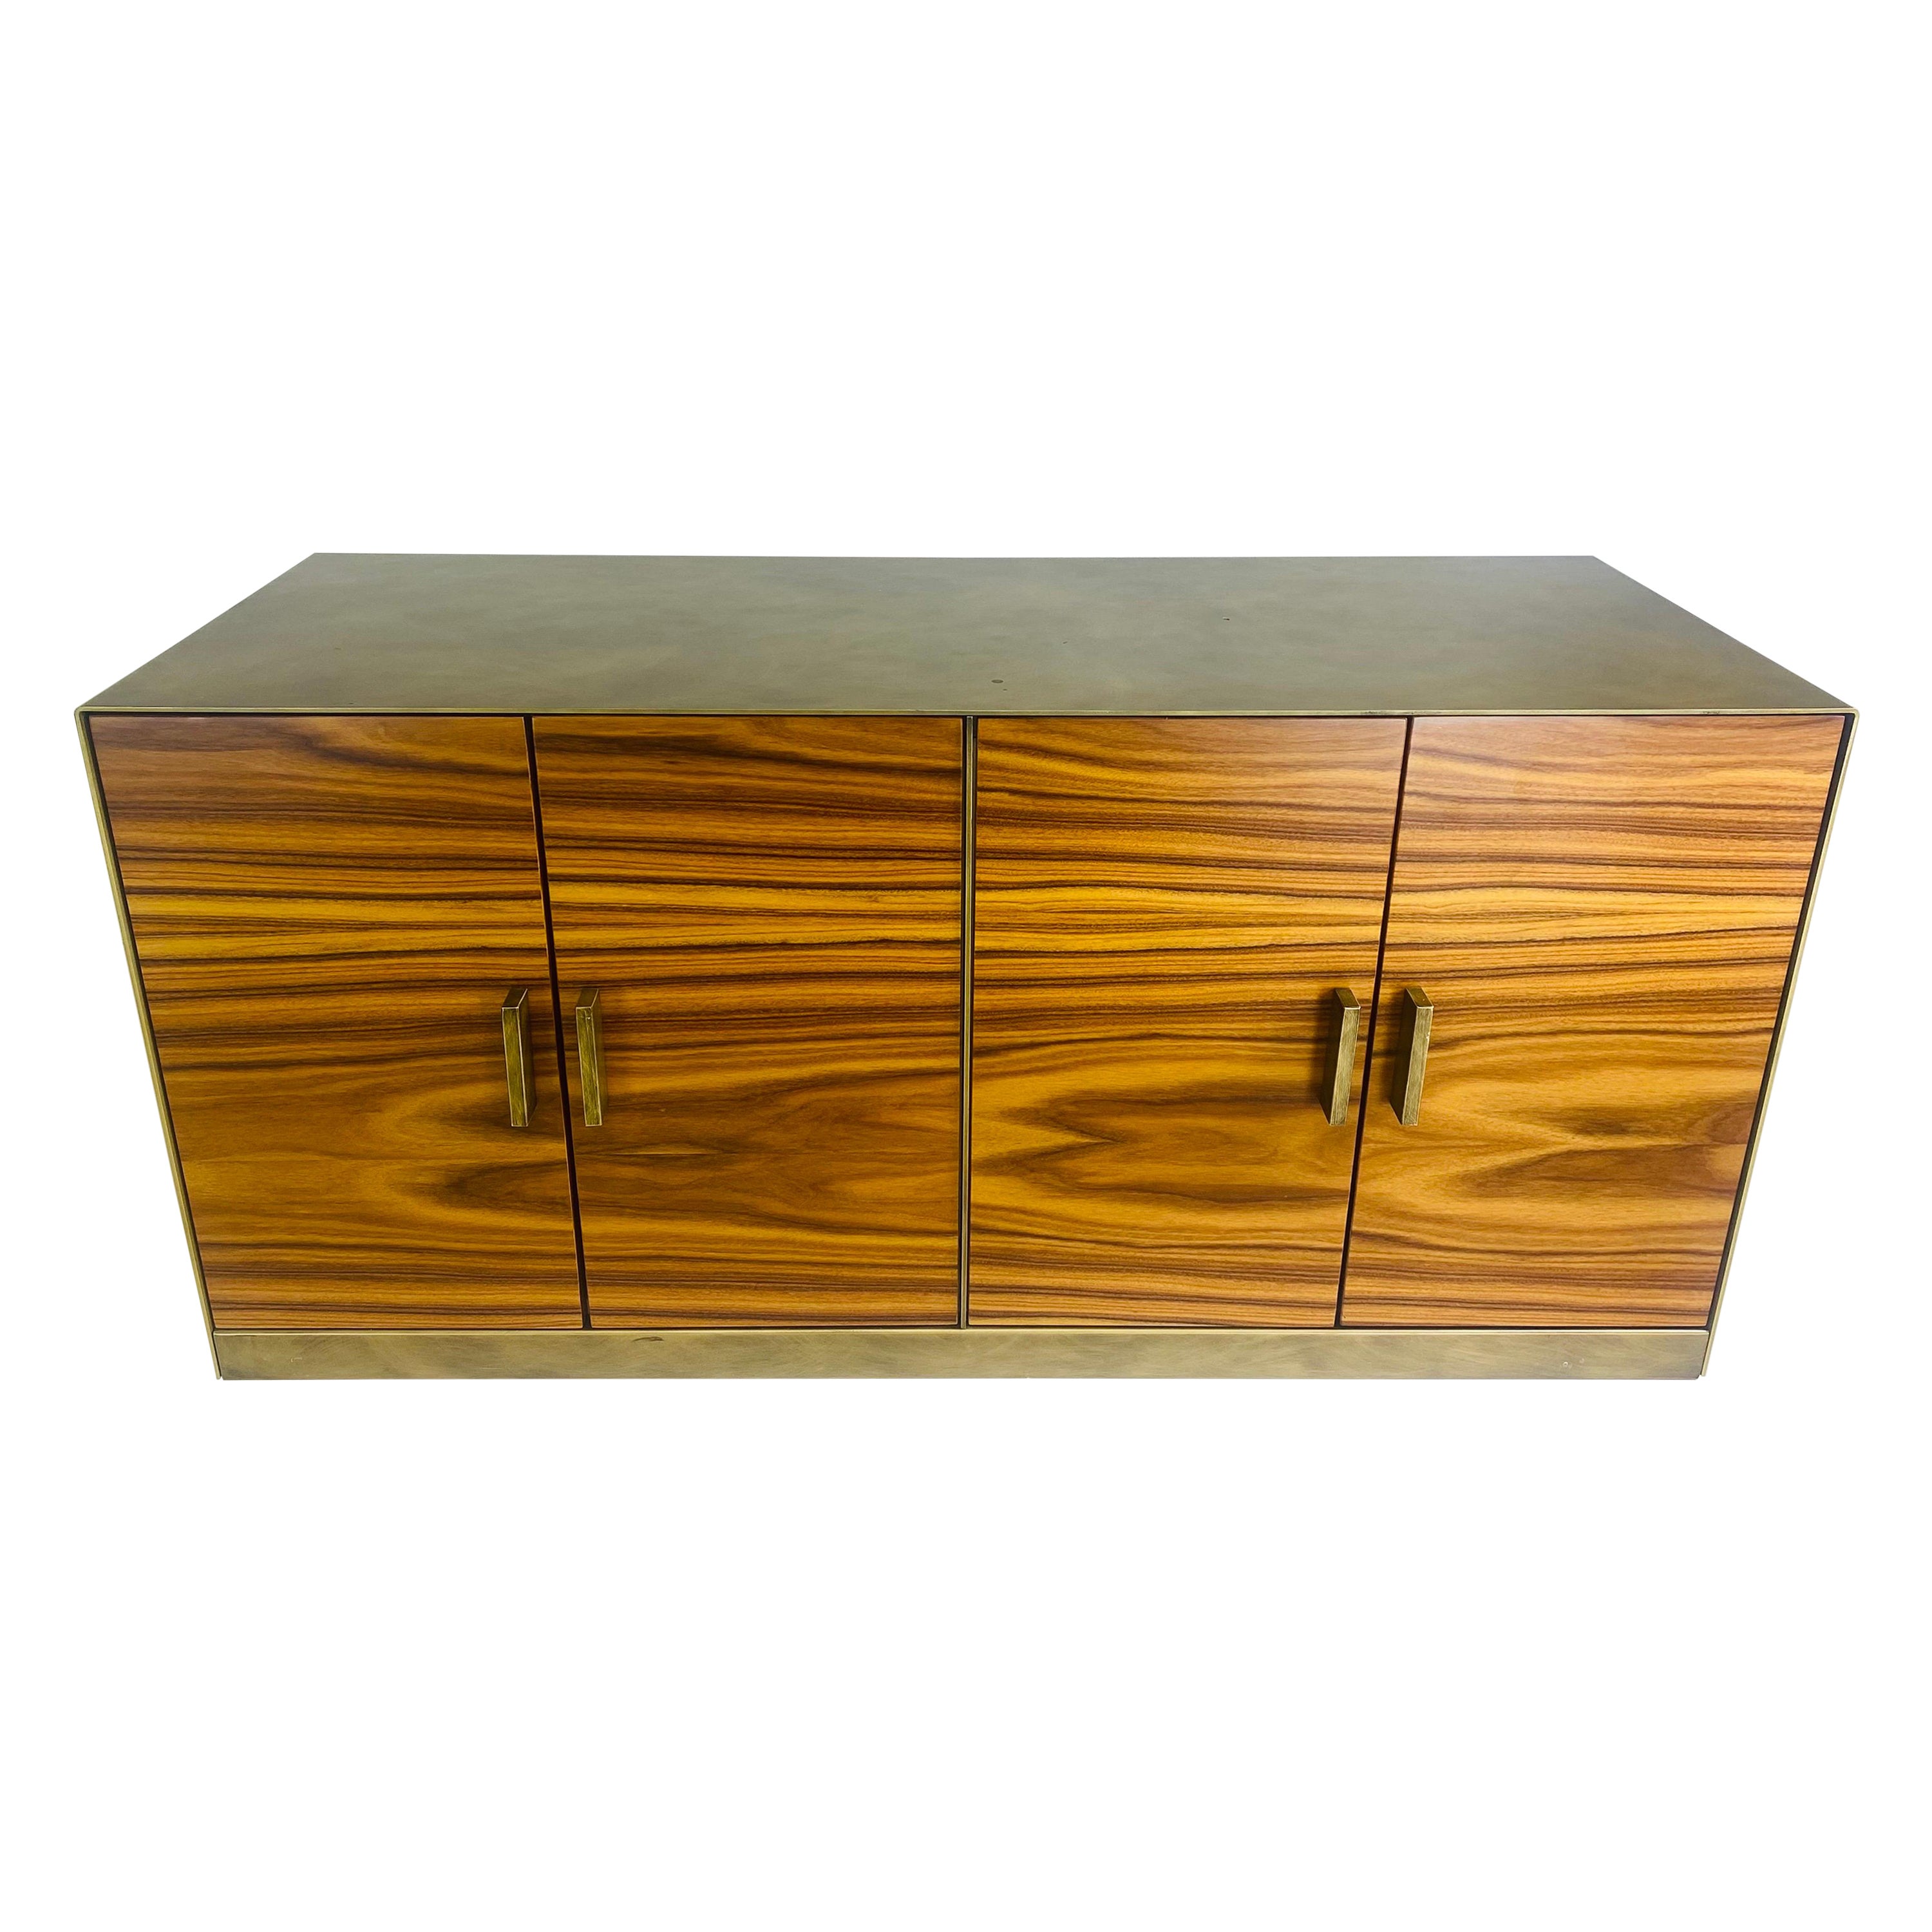 Vintage Italian design zebrawood waterfall chest For Sale